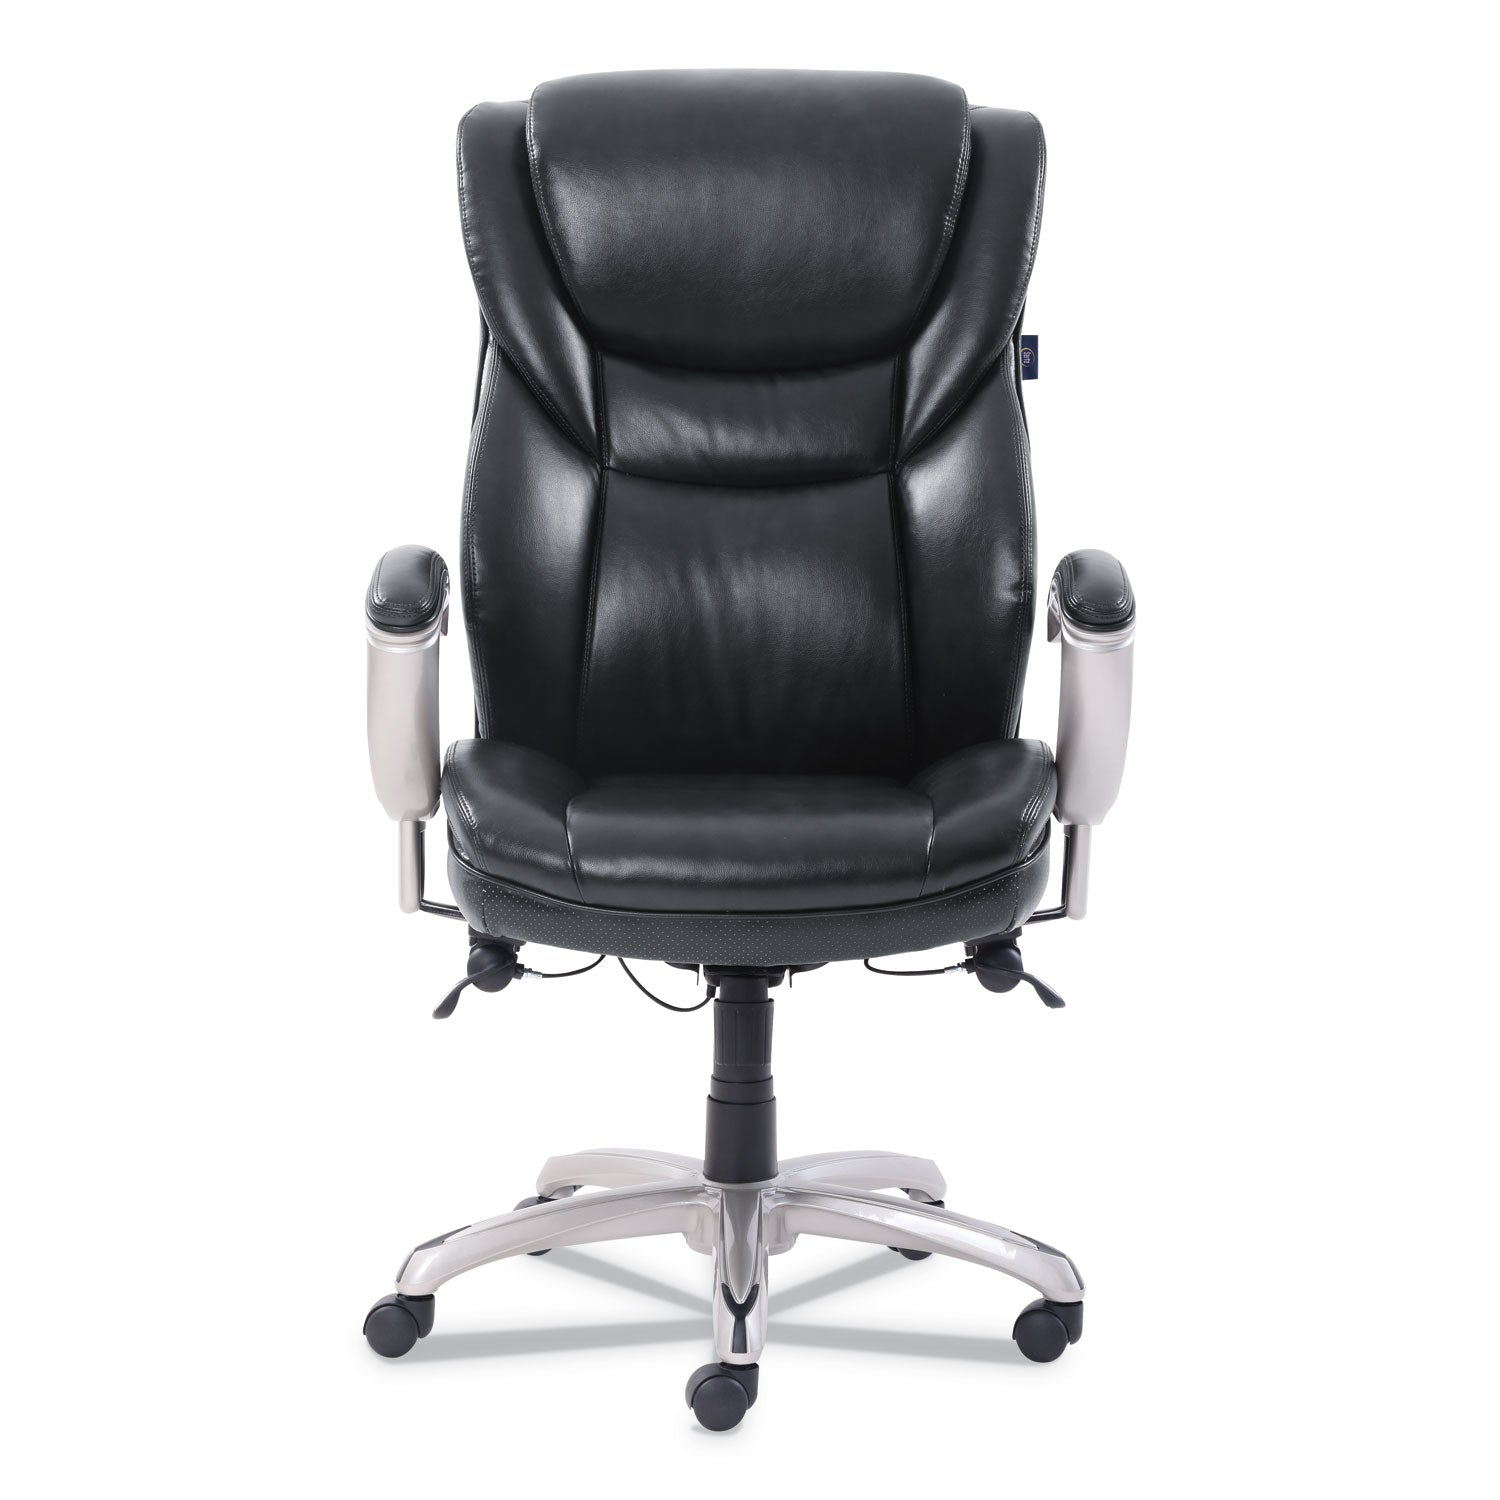 emerson-executive-task-chair-supports-up-to-300-lb-19-to-22-seat-height-black-seat-back-silver-base_srj49710blk - 2